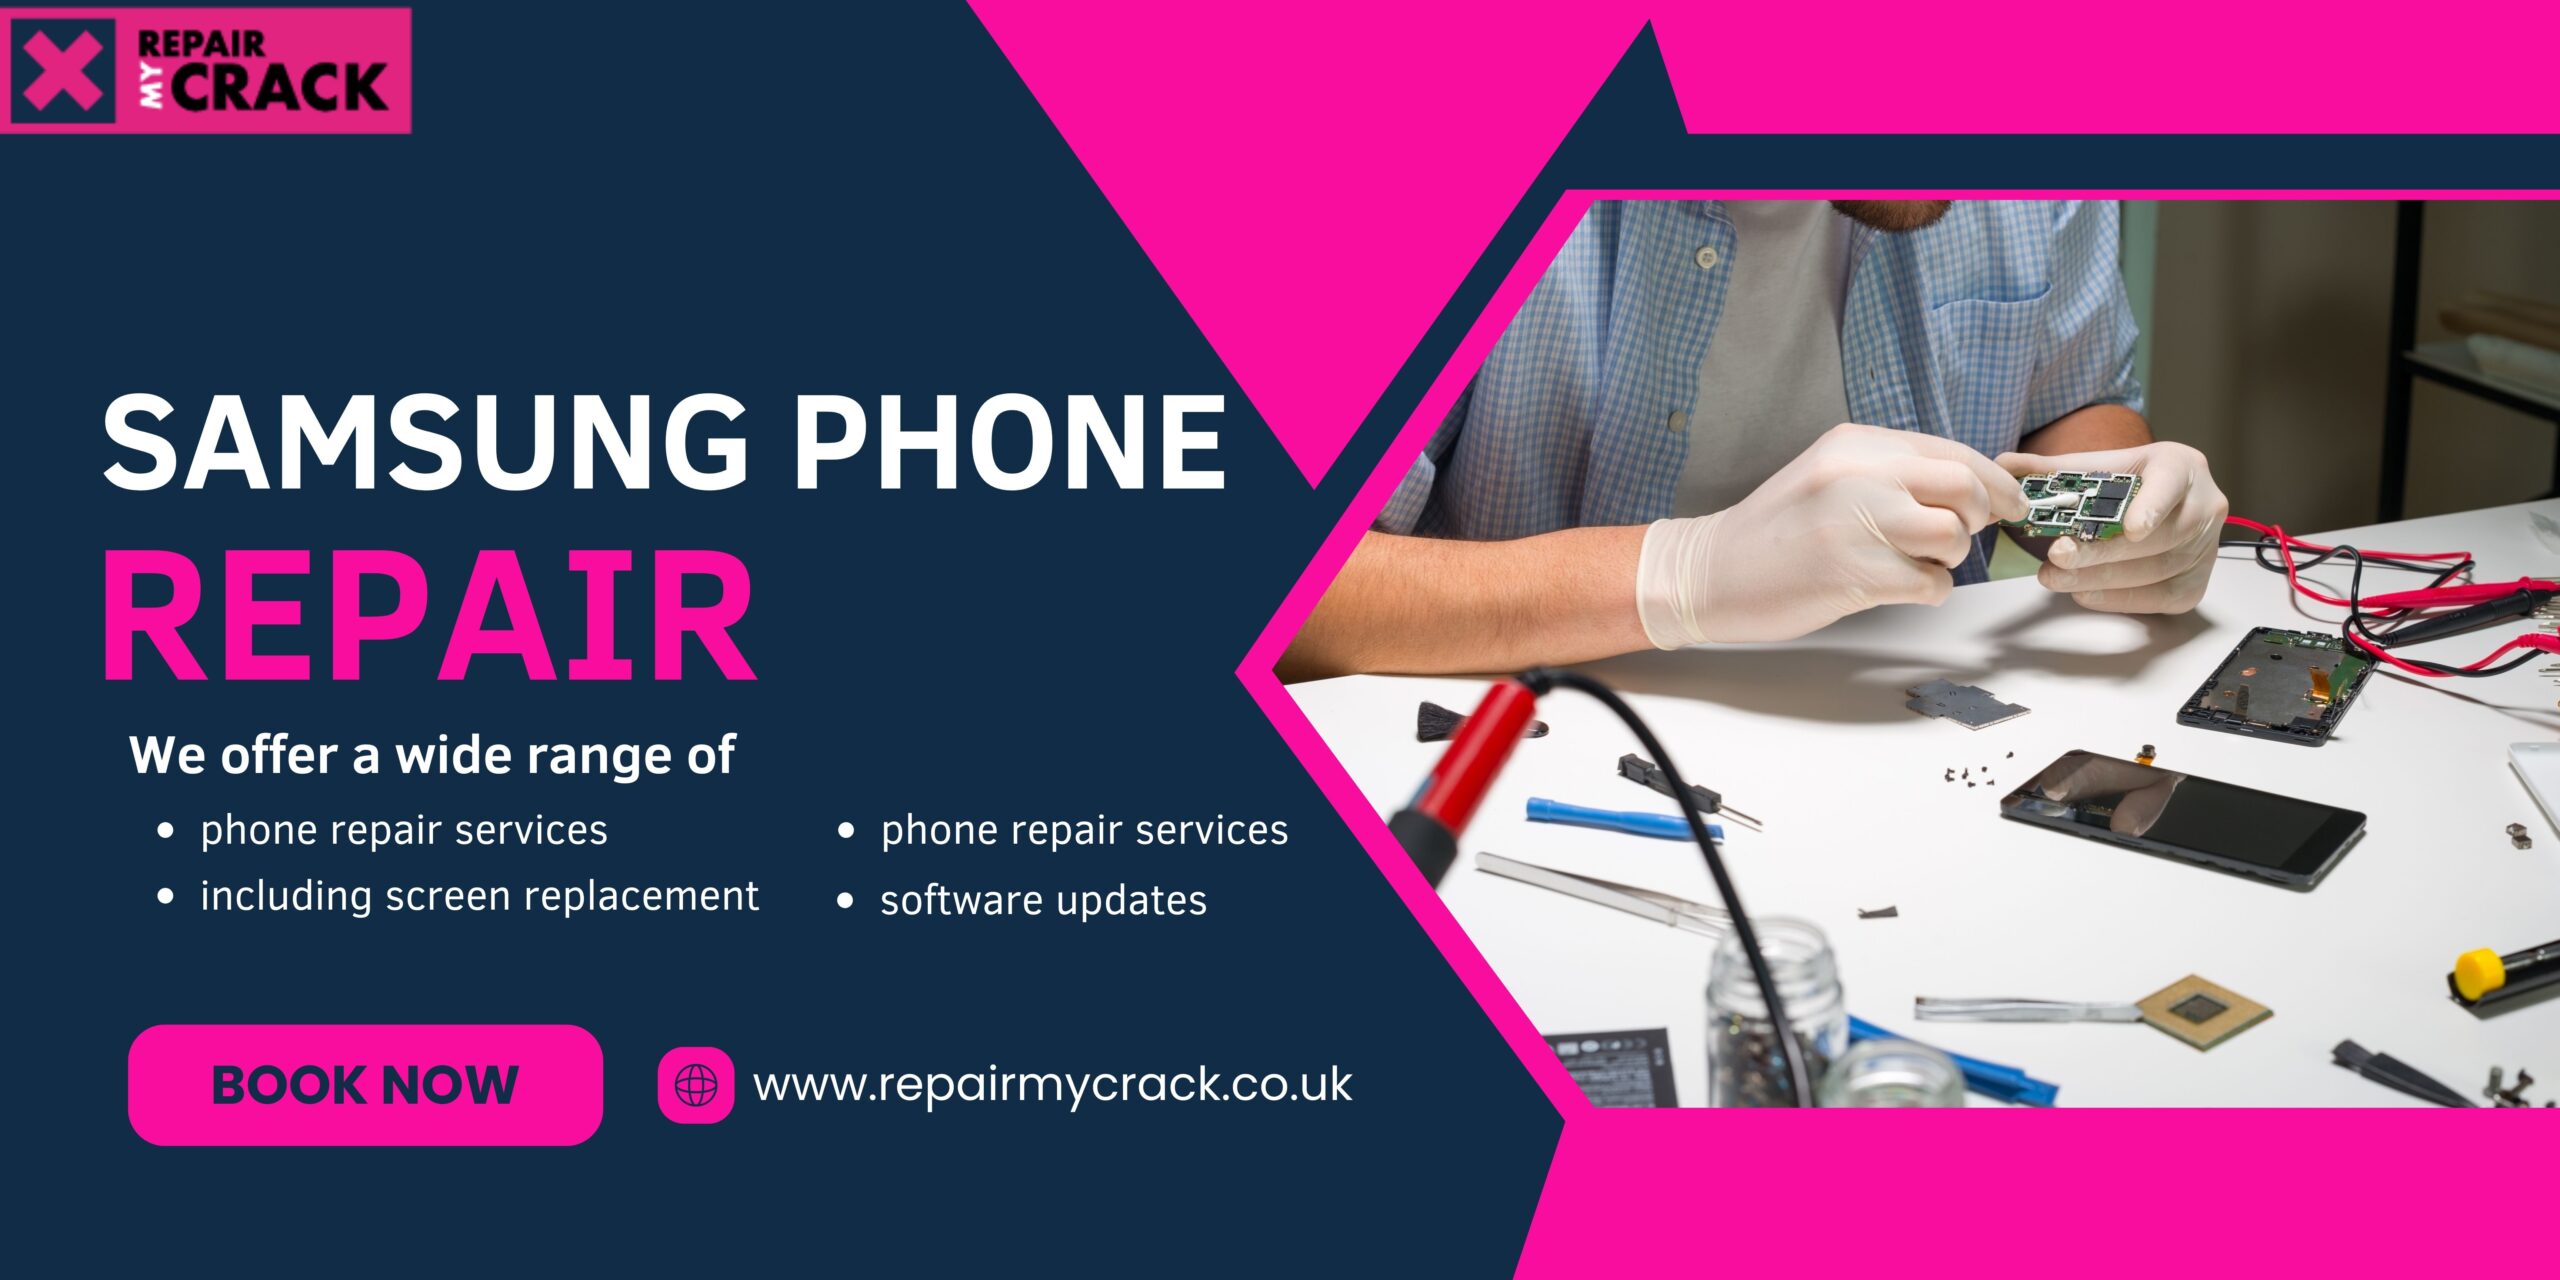 Samsung phone repair. We offer a wide range of phone repair services, screen replacements and software updates.